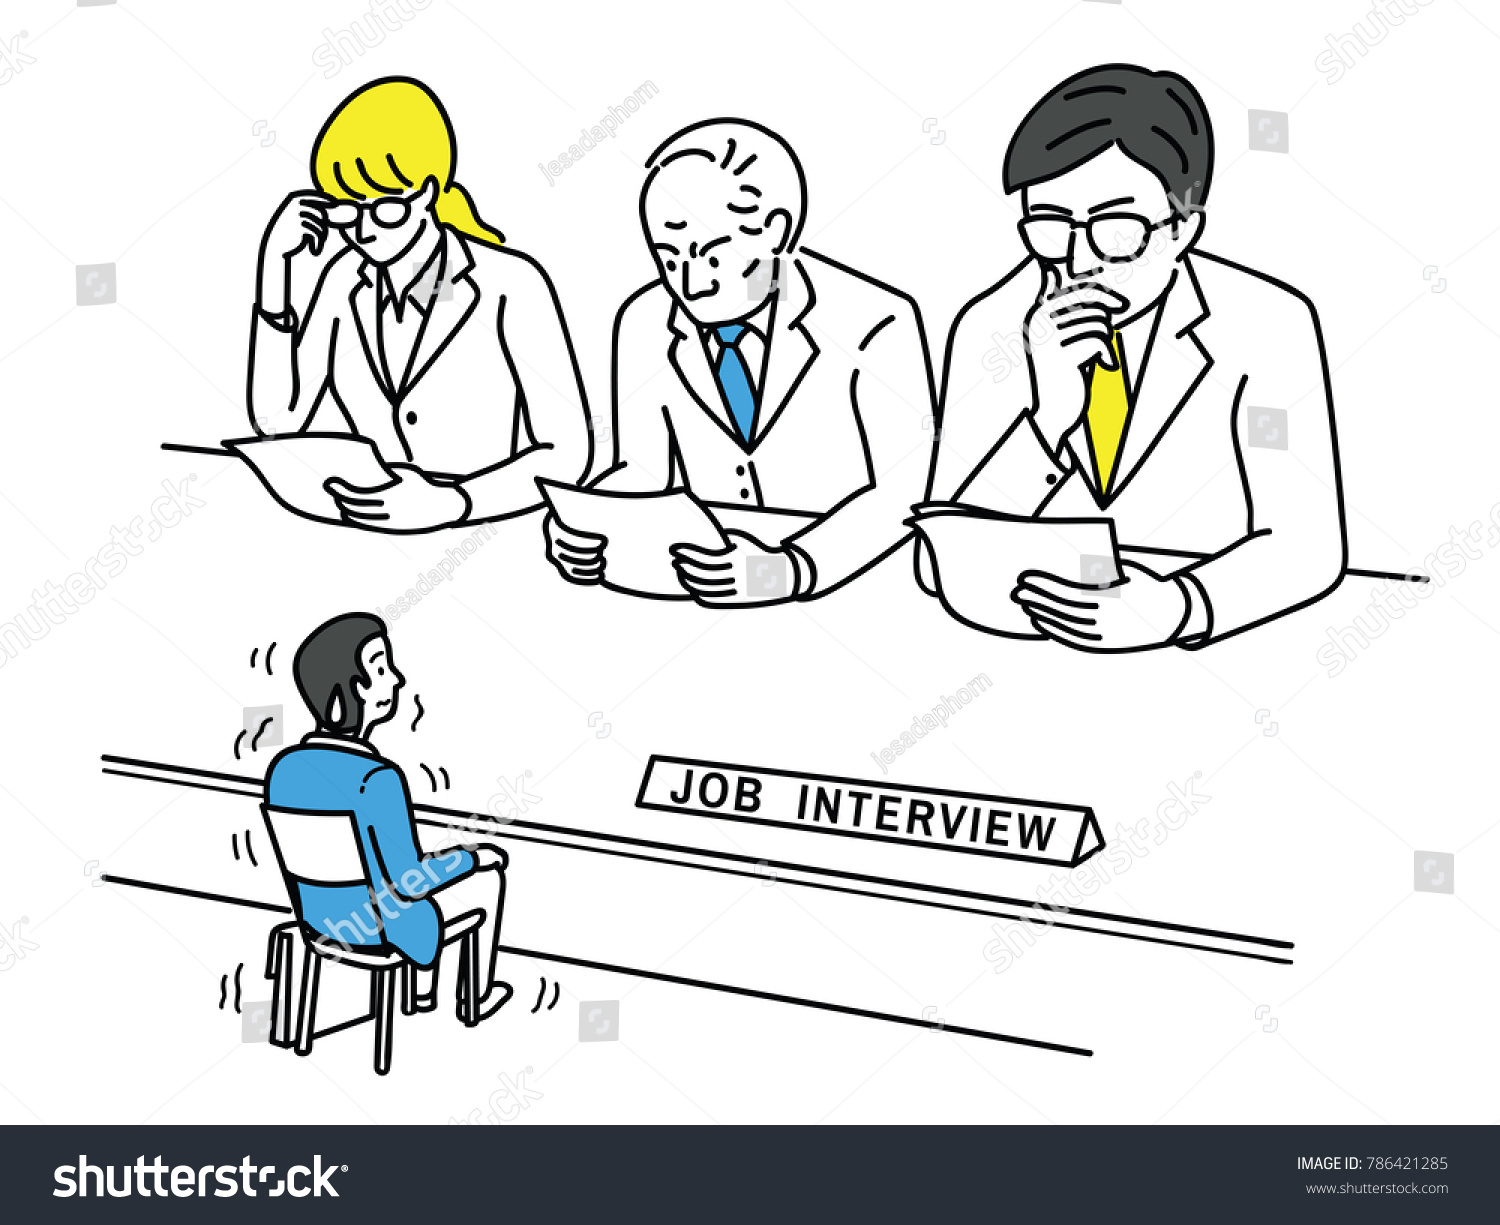 stock-vector-funny-vector-illustration-of-young-man-an-applicant-feel-nervous-and-himself-very-small-size-786421285